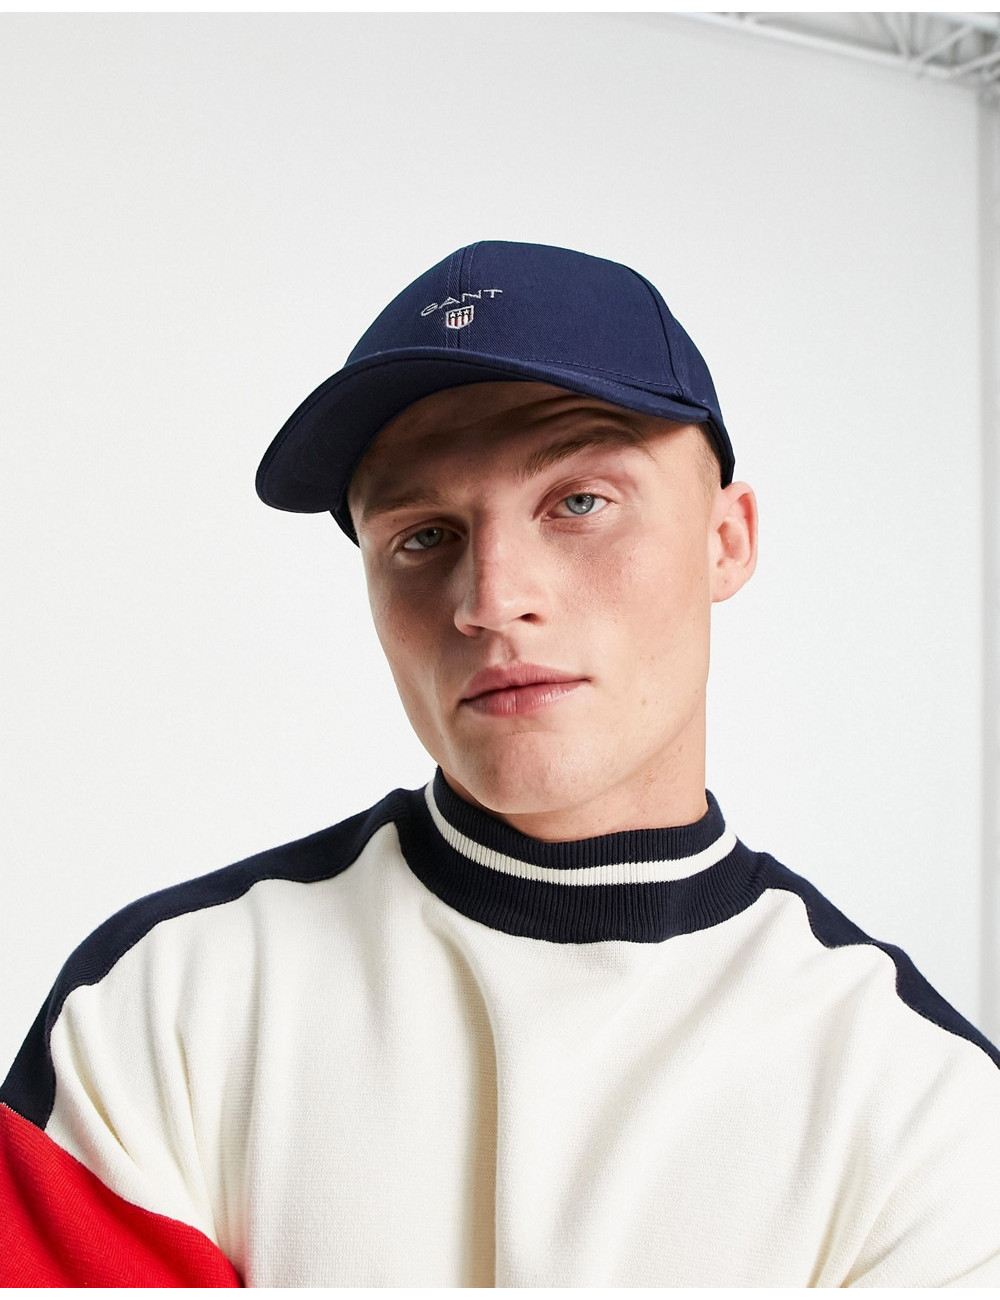 GANT cap in navy with small...